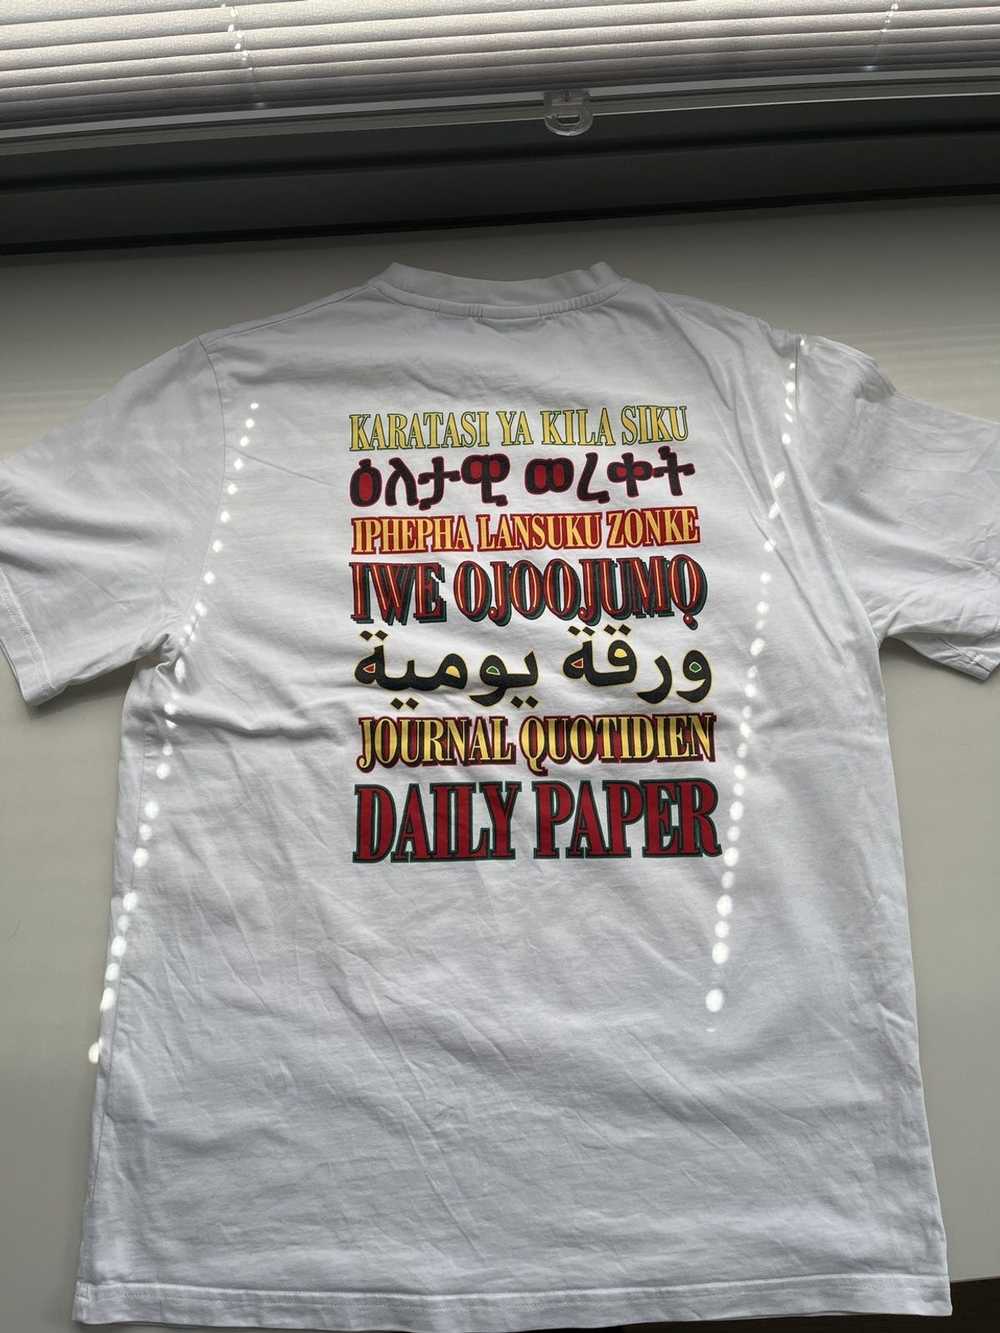 Daily Paper Daily paper tee - image 2